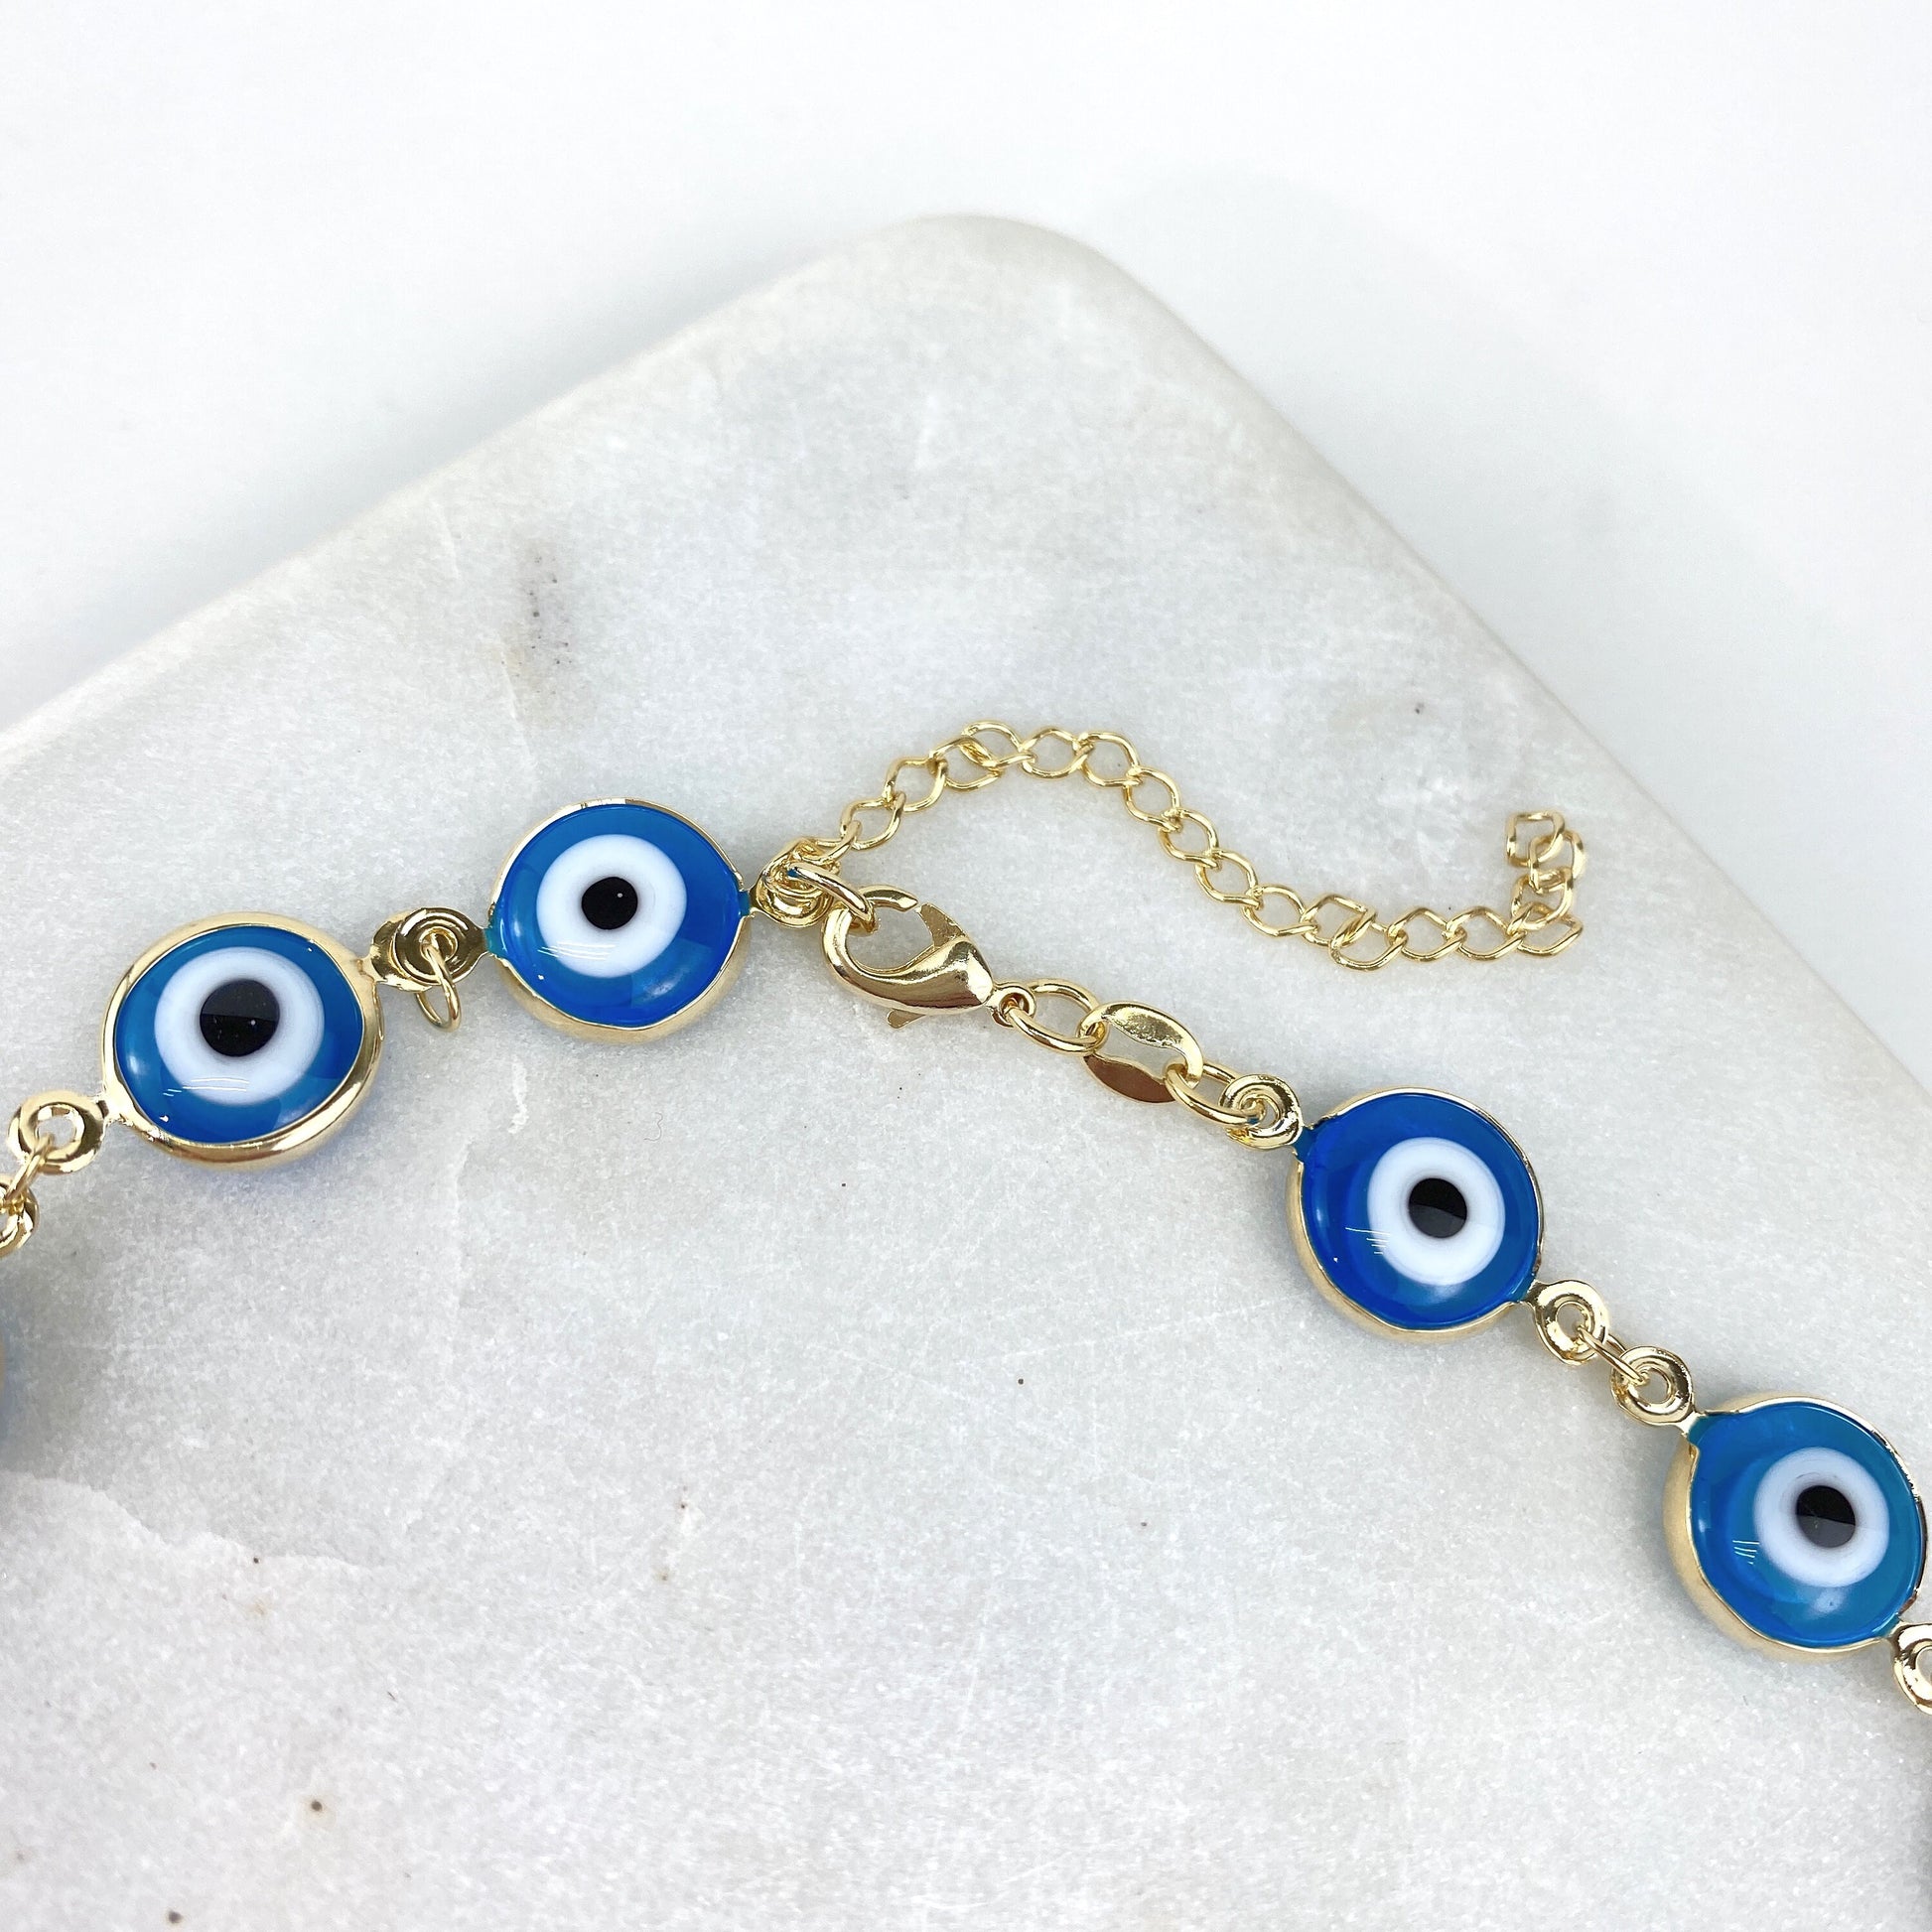 18k Gold Filled Fancy 10mm Greek Blue Eyes, Link Style, Bracelet or Necklace, Protection & Lucky, Wholesale Jewelry Supplies